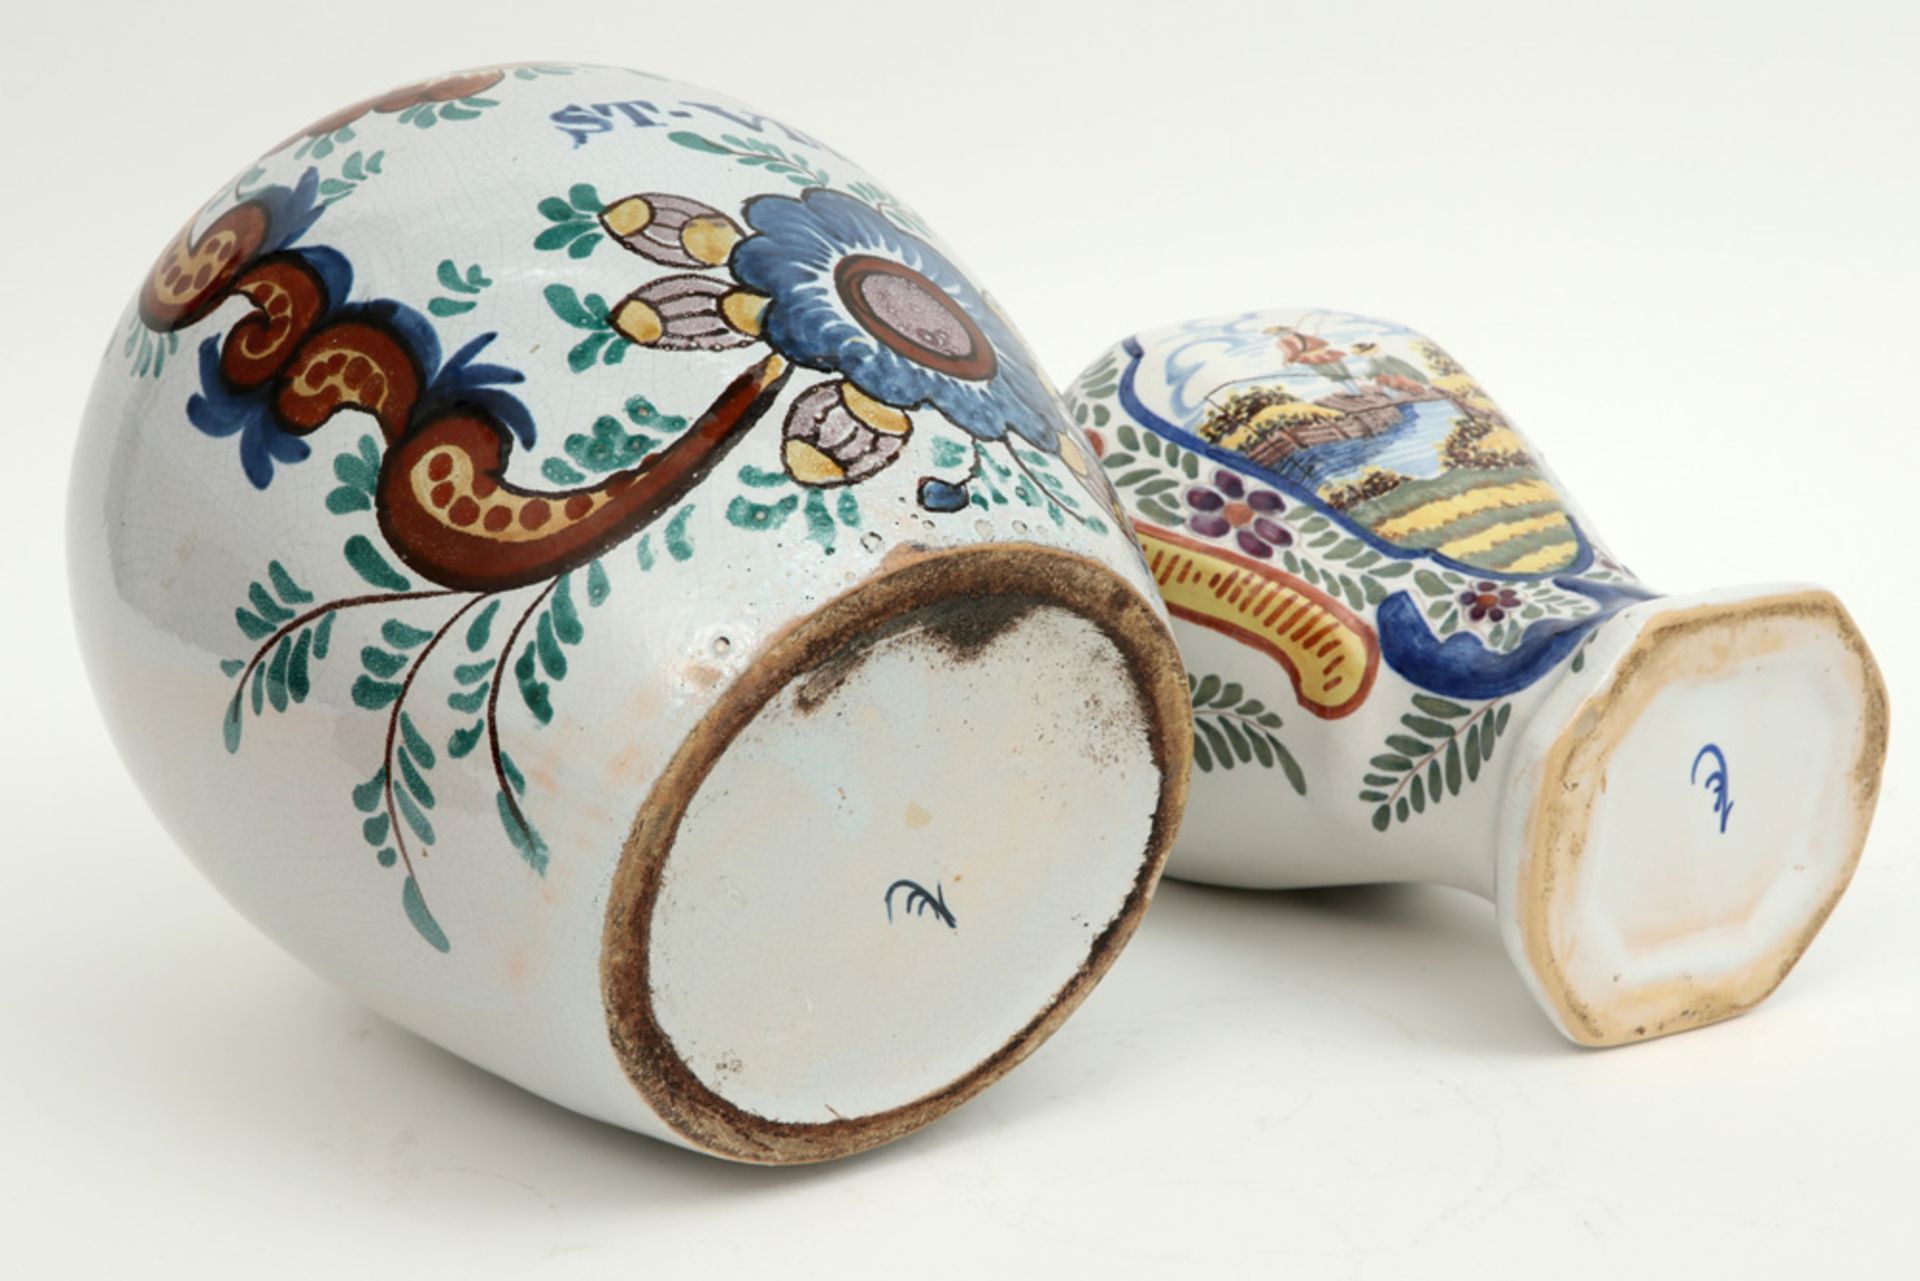 vase and tobacco jar in marked ceramic from Delft with a polychrome decor - Image 4 of 5